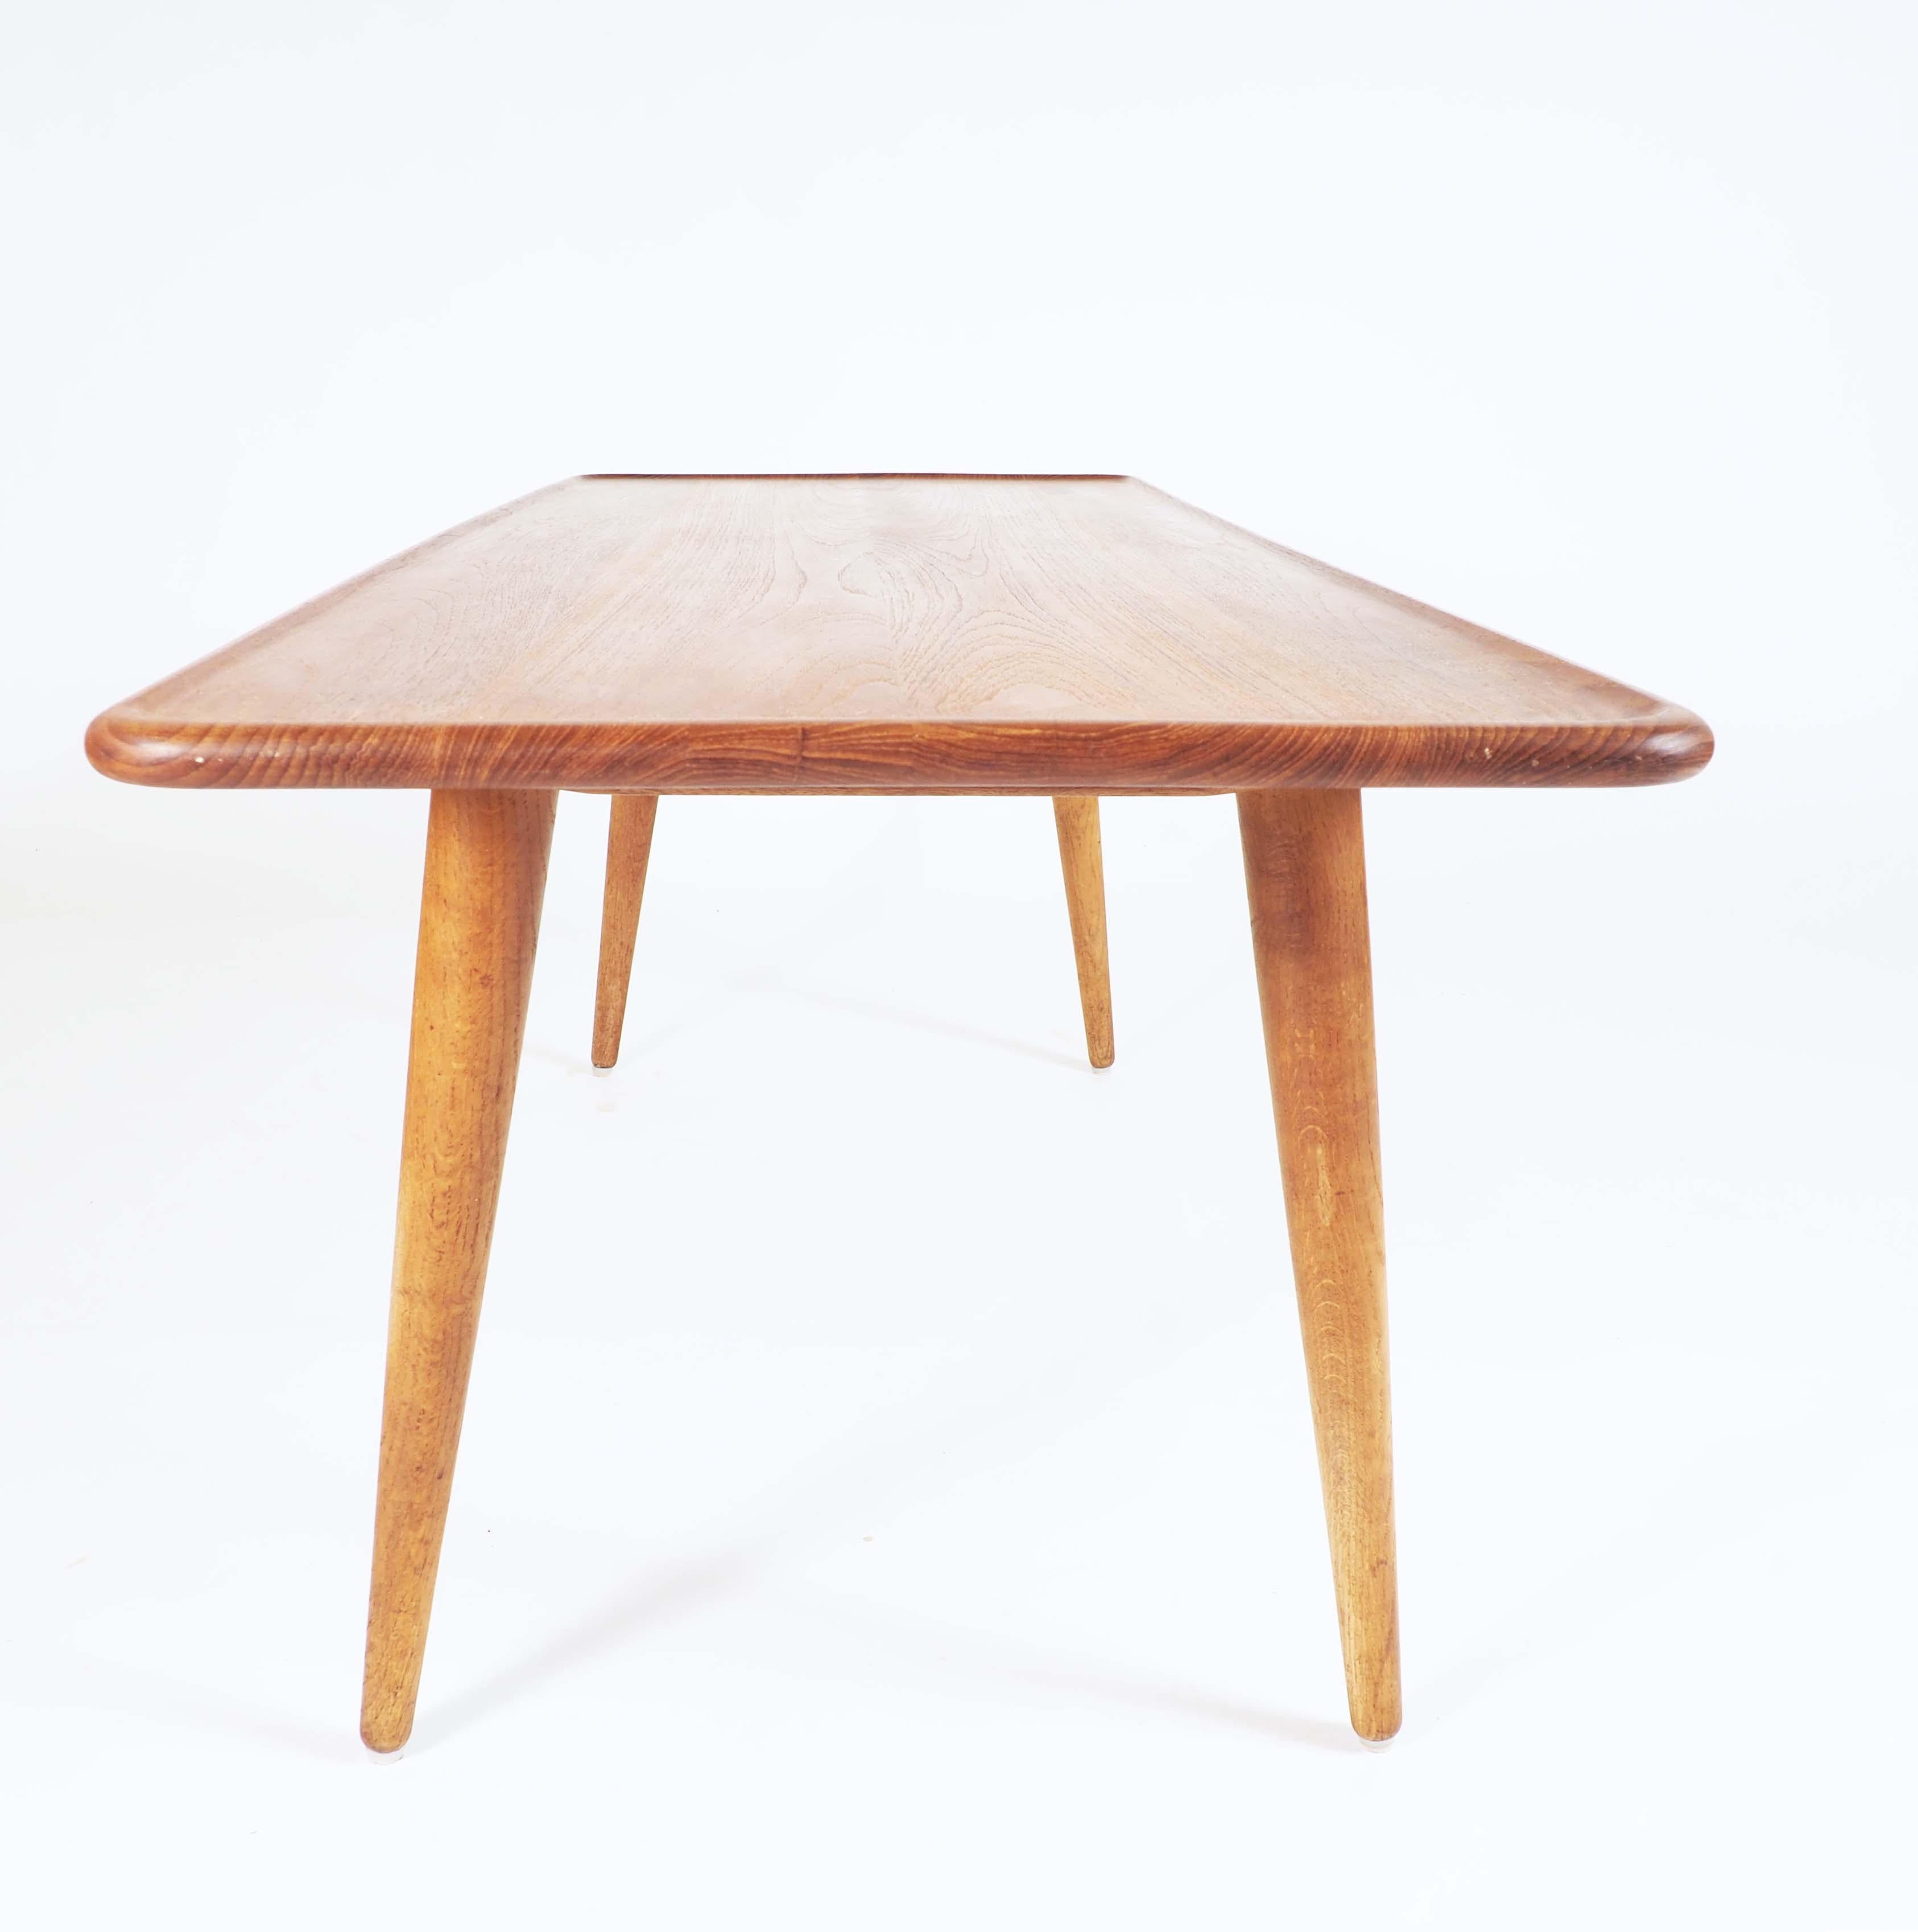 Mid-20th Century Coffee Table AT-11 in Massive Teak by Hans Wegner for Andreas Tuck, Denmark For Sale